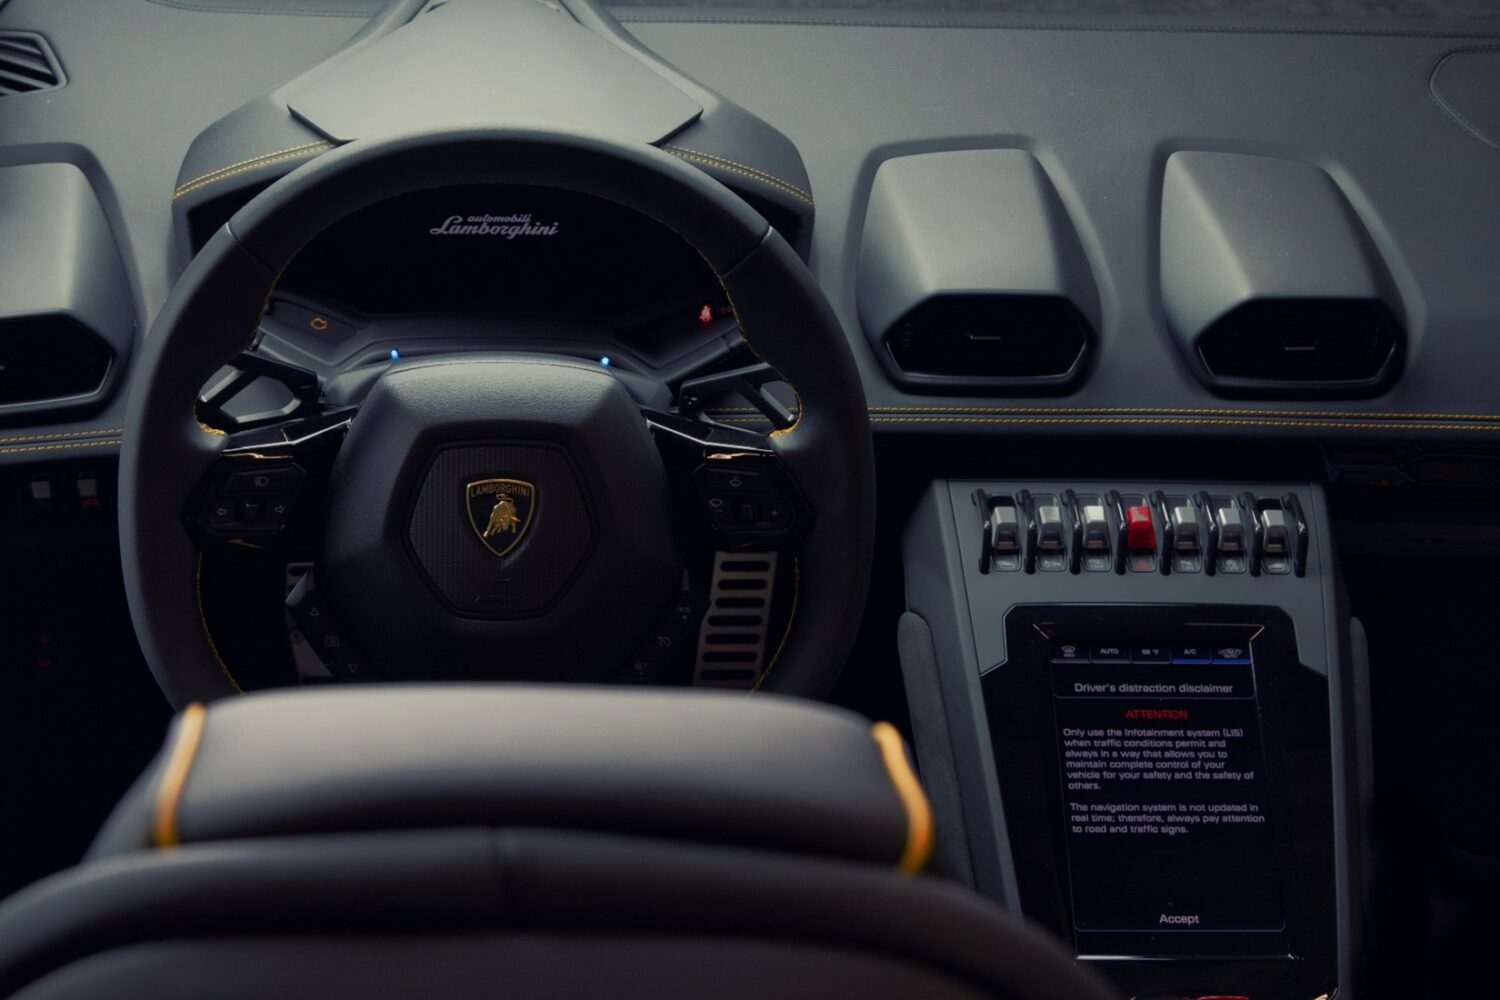 Lamborghini interior with an LIS display in the center console